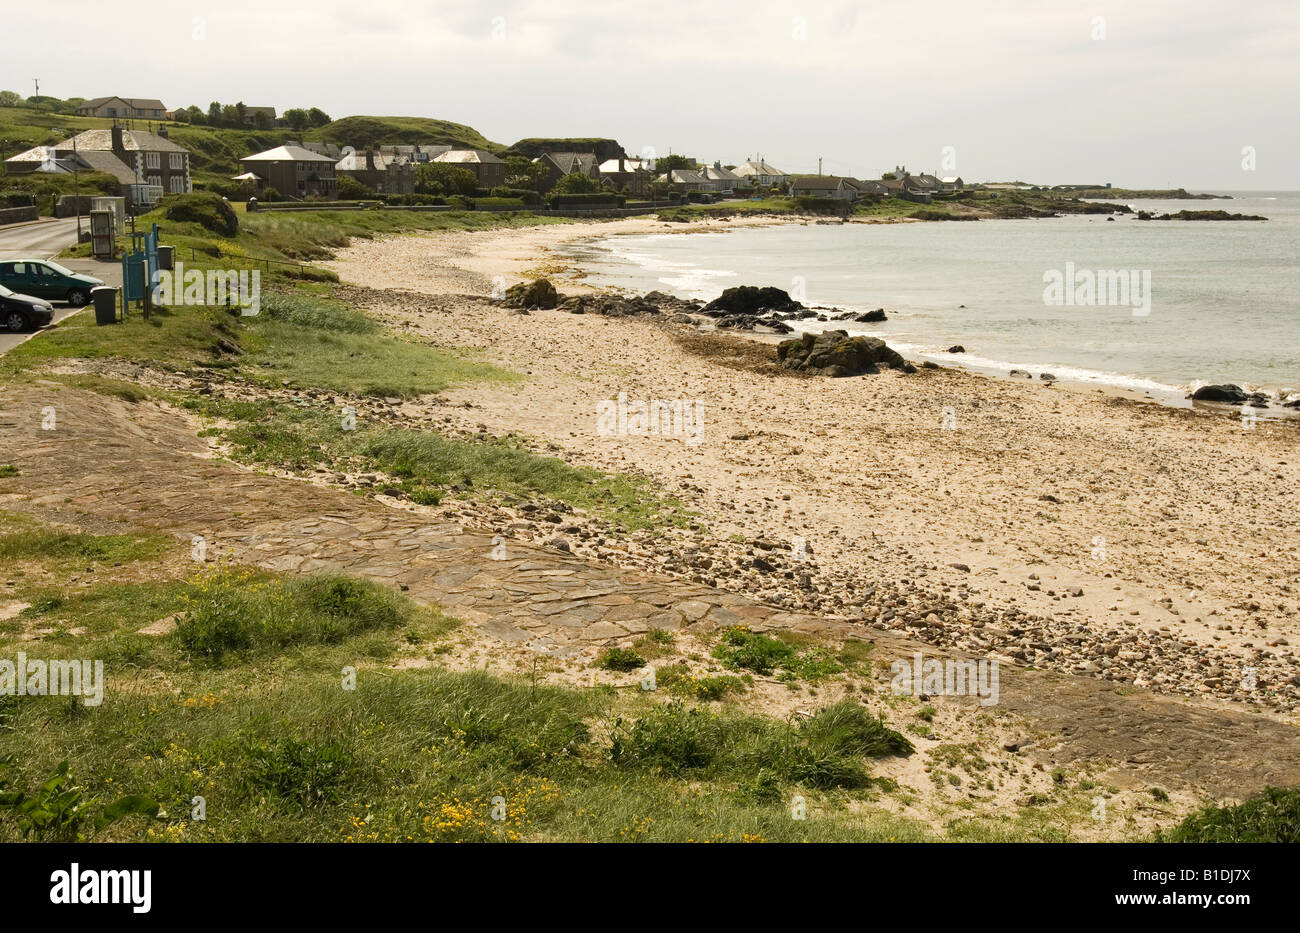 A view of the tiny coastal village of Macrahanish on the Mull of Kintyre. The village is home to a golf course and airport. Stock Photo